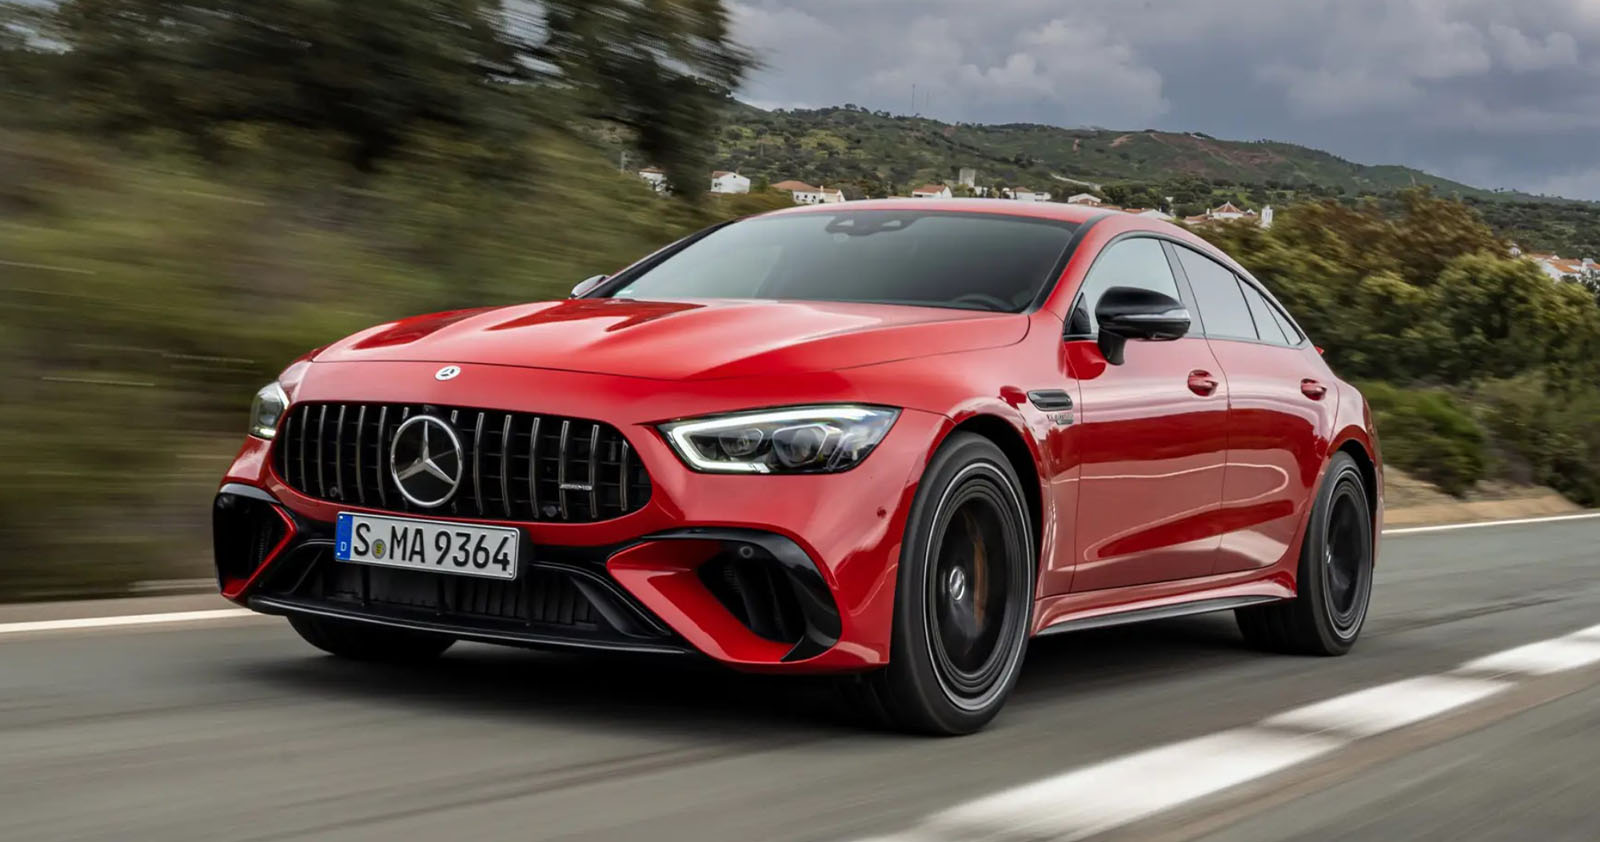 2022 red Mercedes AMG GT 6 S E Performance hybrid sports saloon